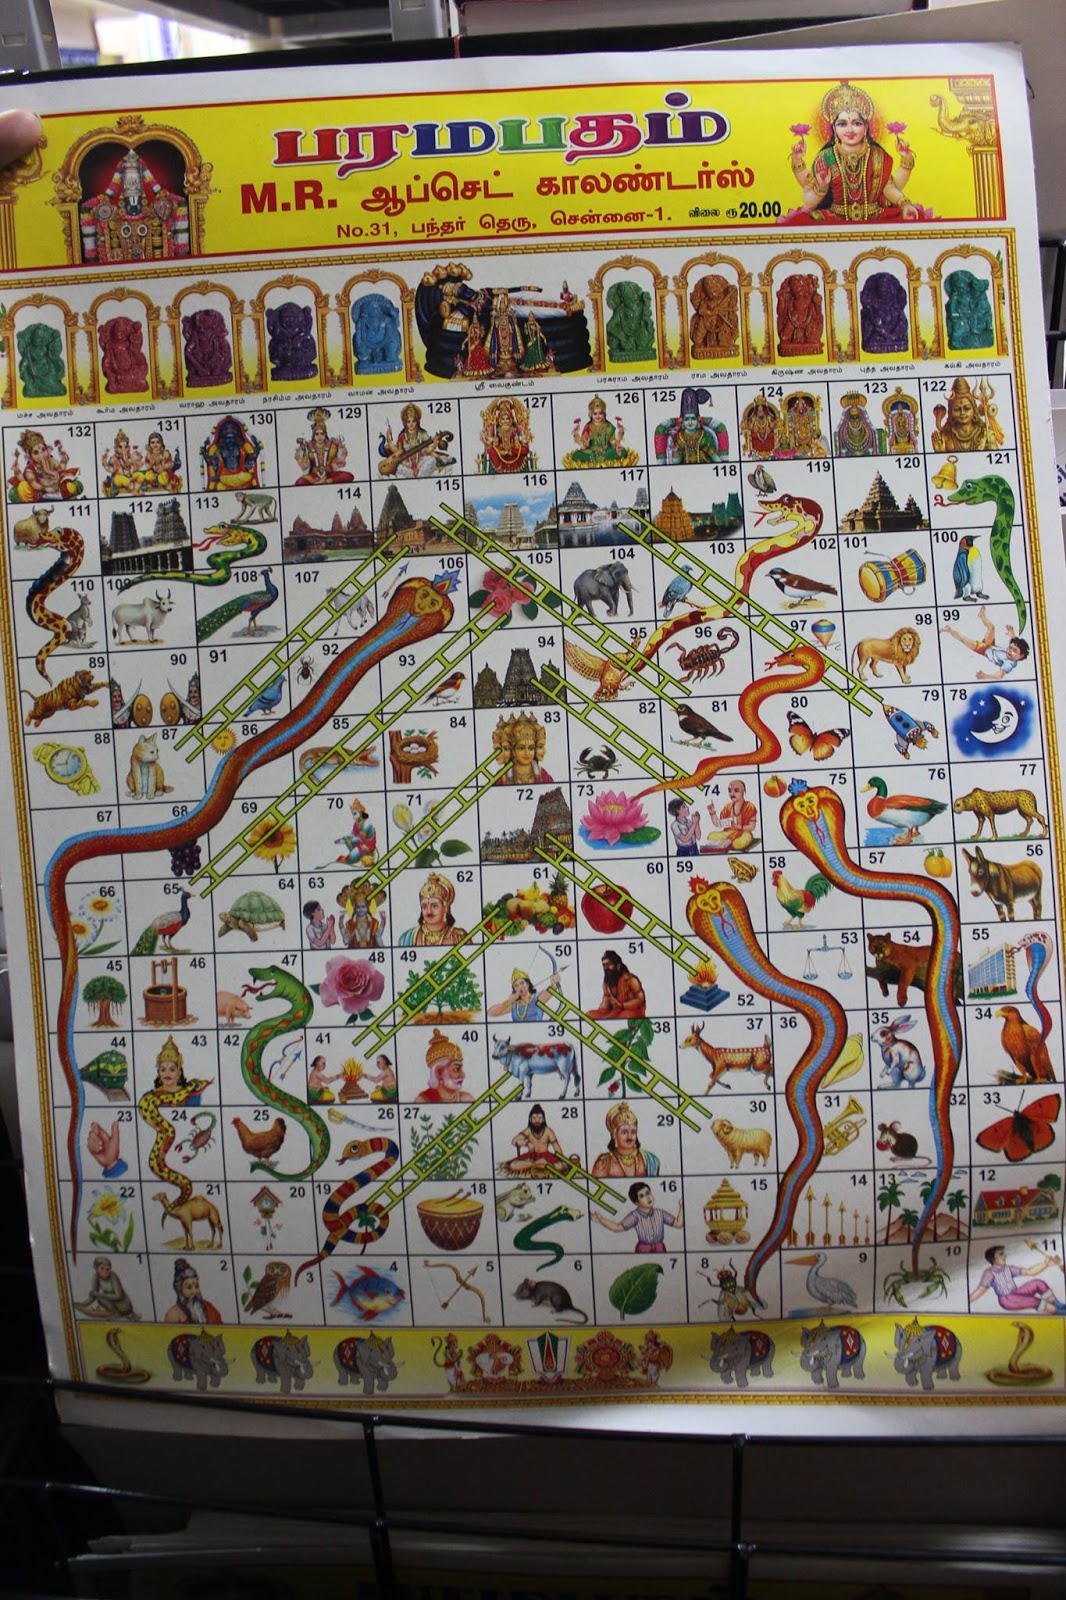 The Magic Tours Blog: Parama Padam: The 'Snakes and Ladders' of India